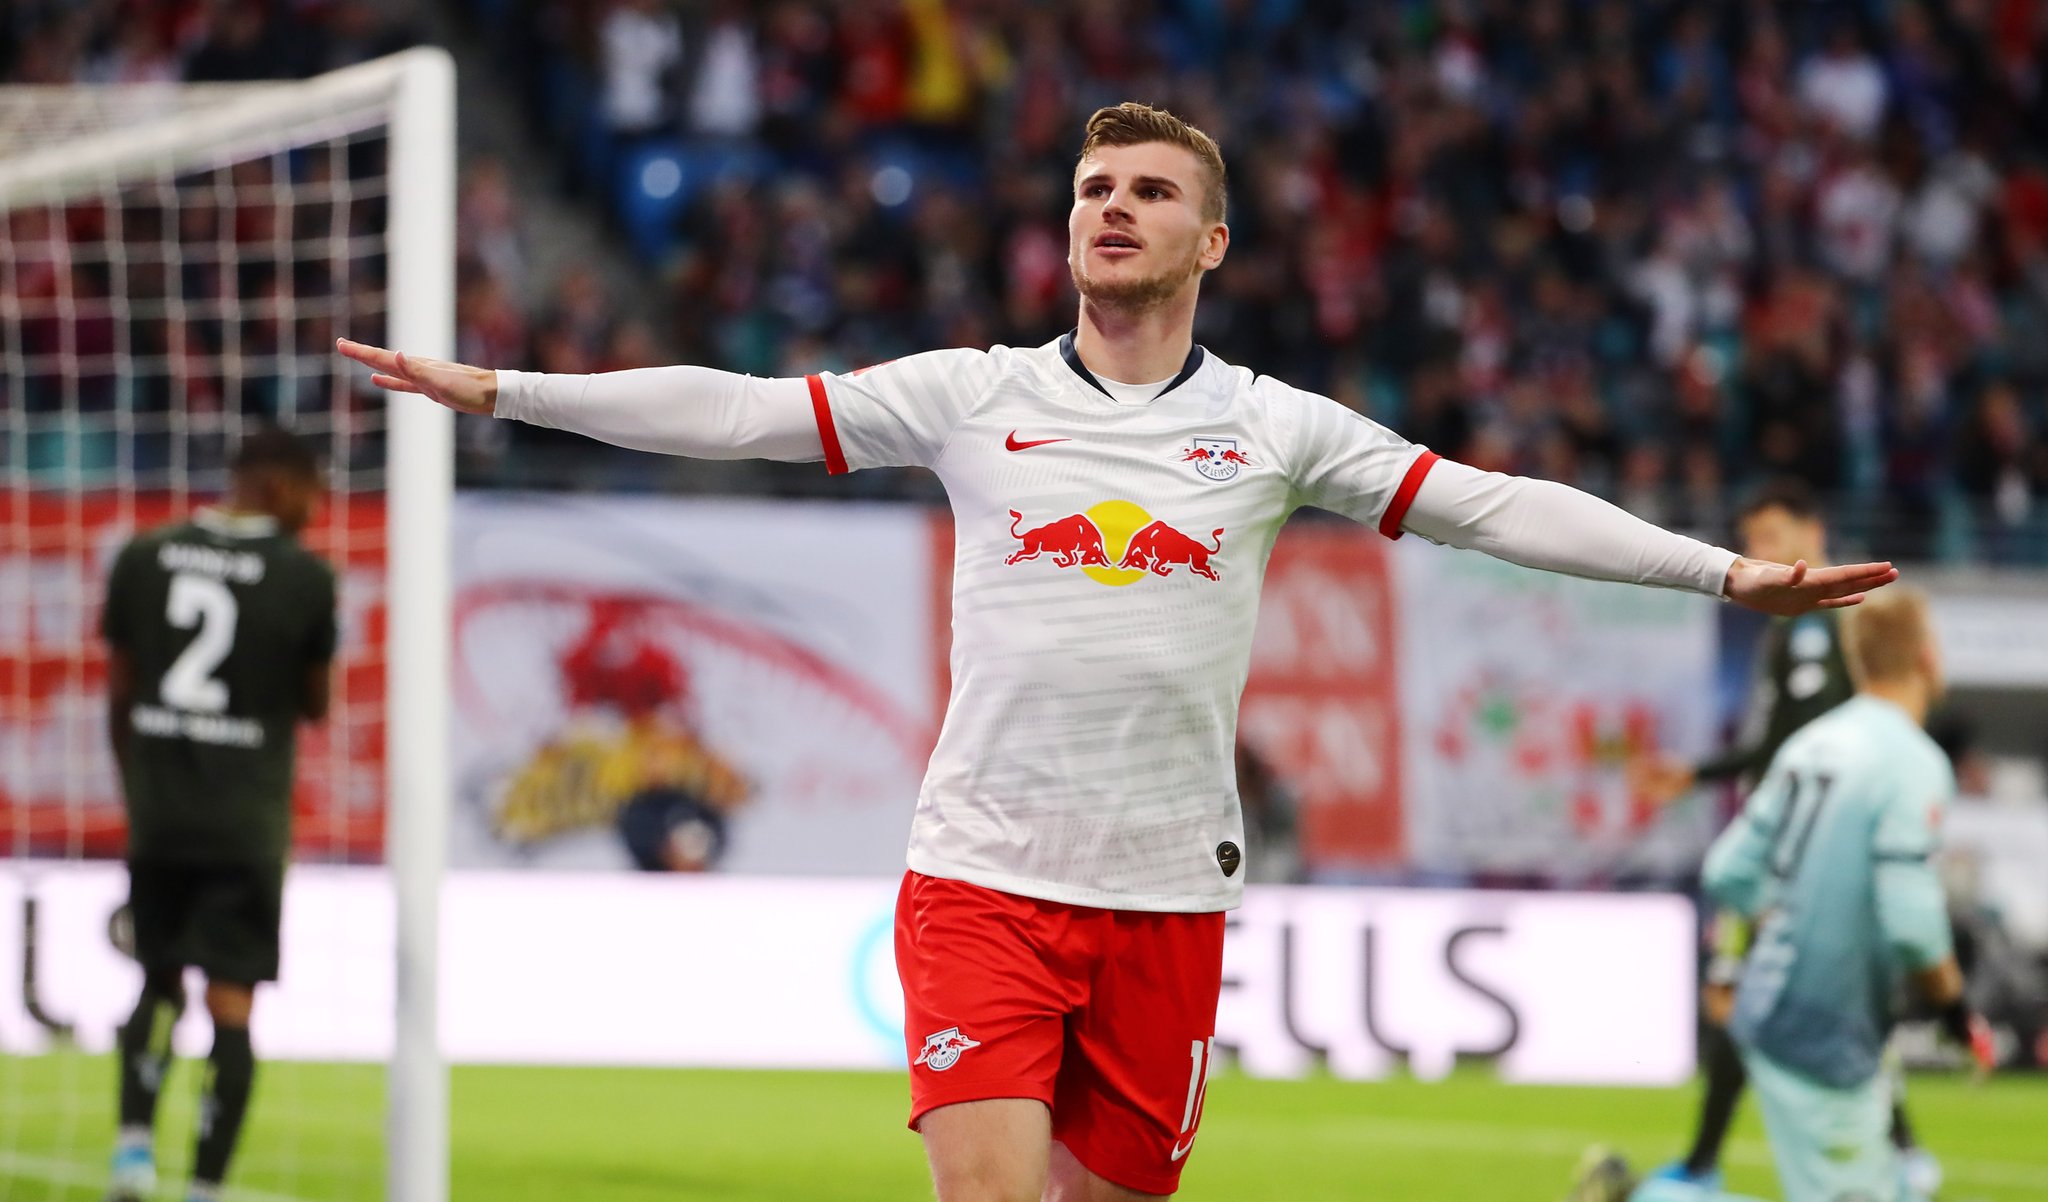 Chelsea complete £47.5 million move for RB Leipzig’s Timo Werner